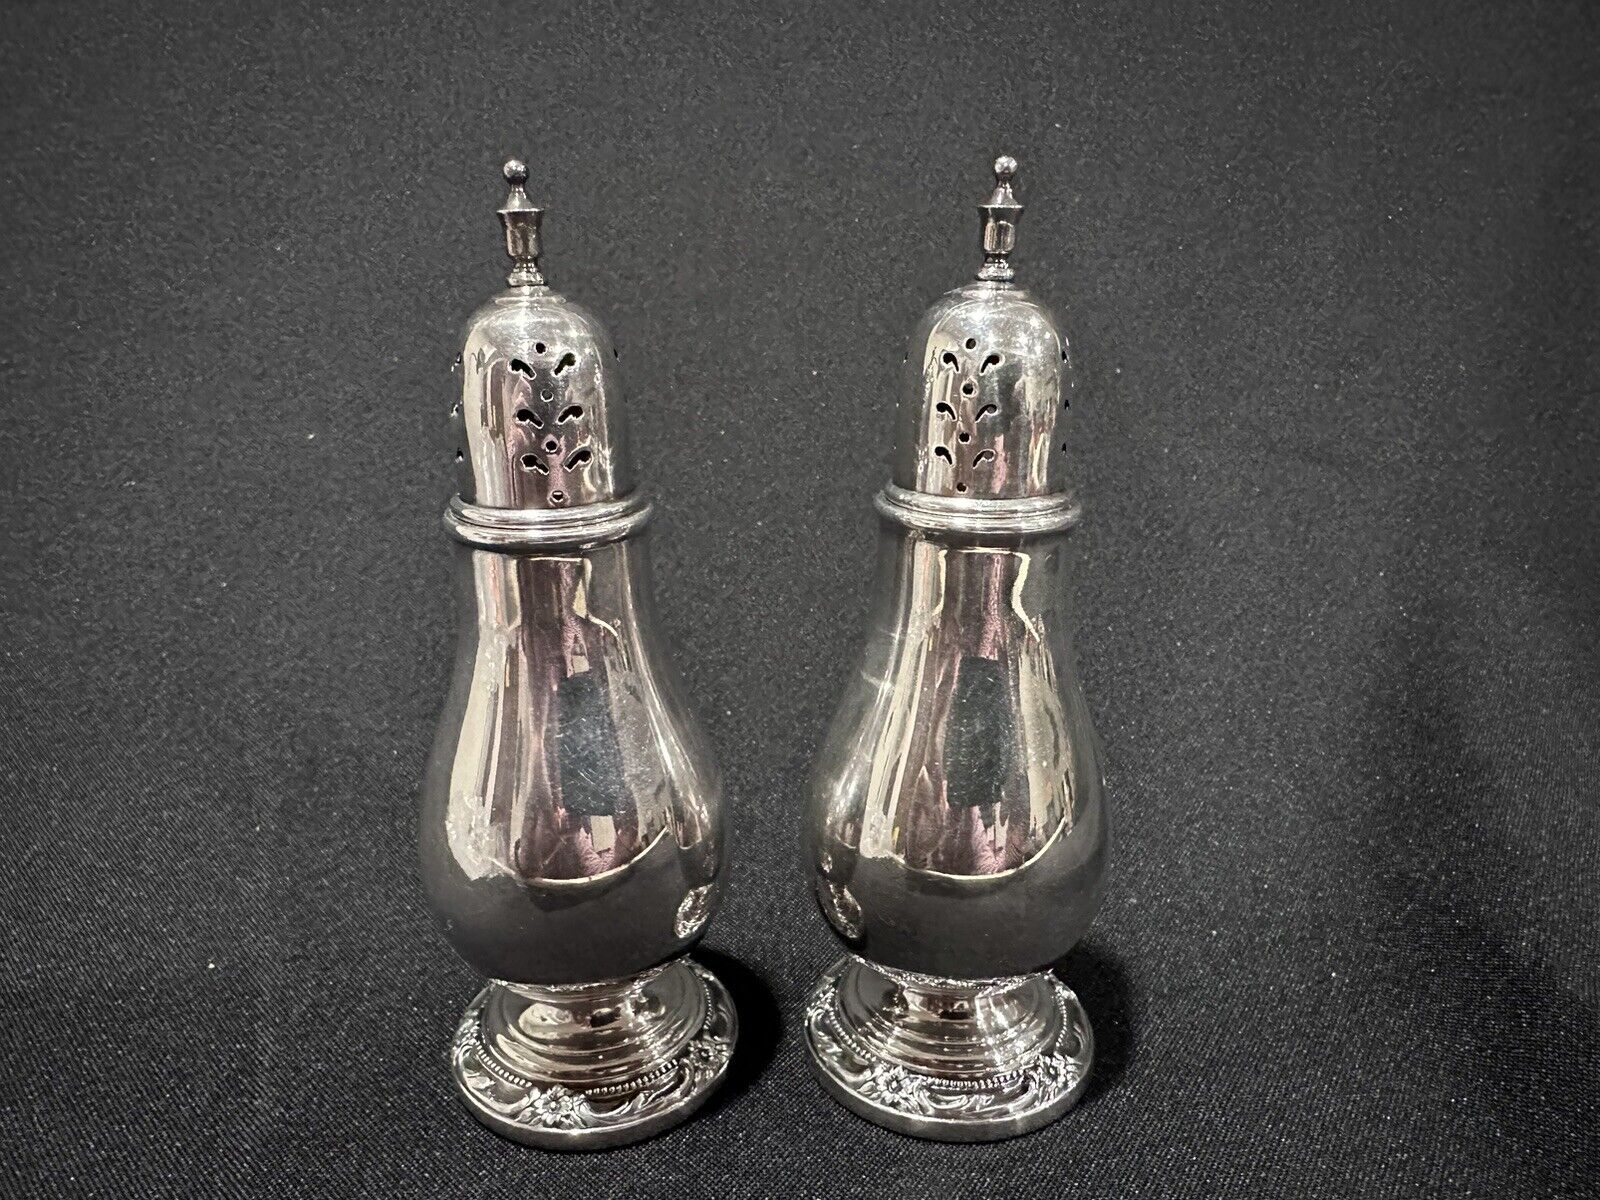 Remembrance Salt and Pepper Shakers 1847 Rogers Bros Silverplated